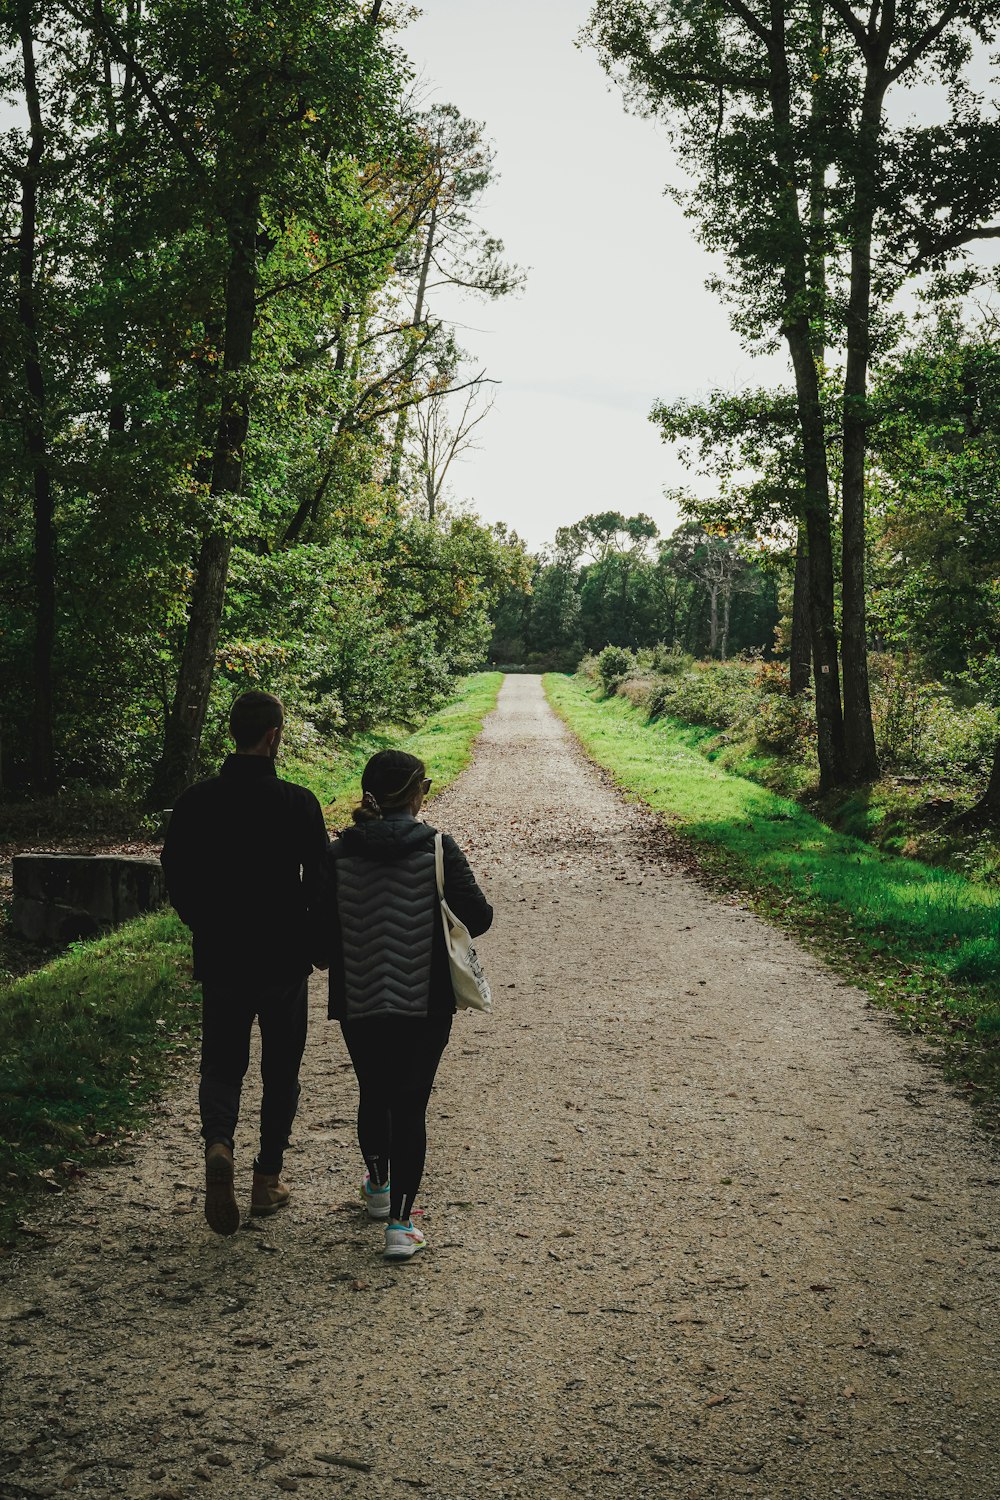 a man and a woman walking down a dirt road